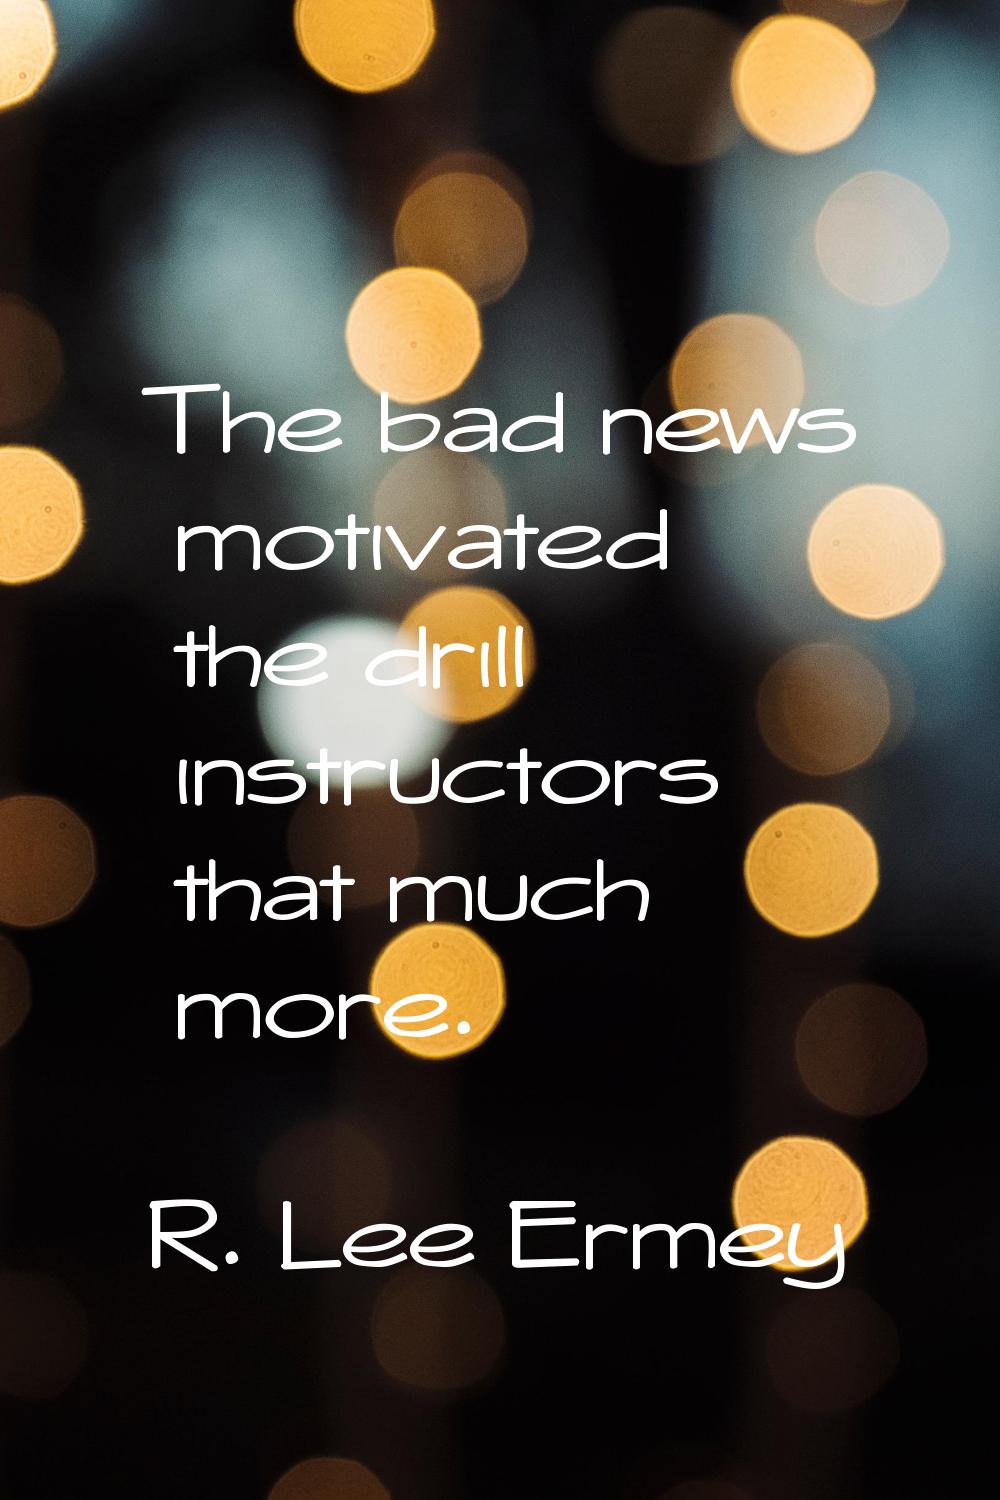 The bad news motivated the drill instructors that much more.